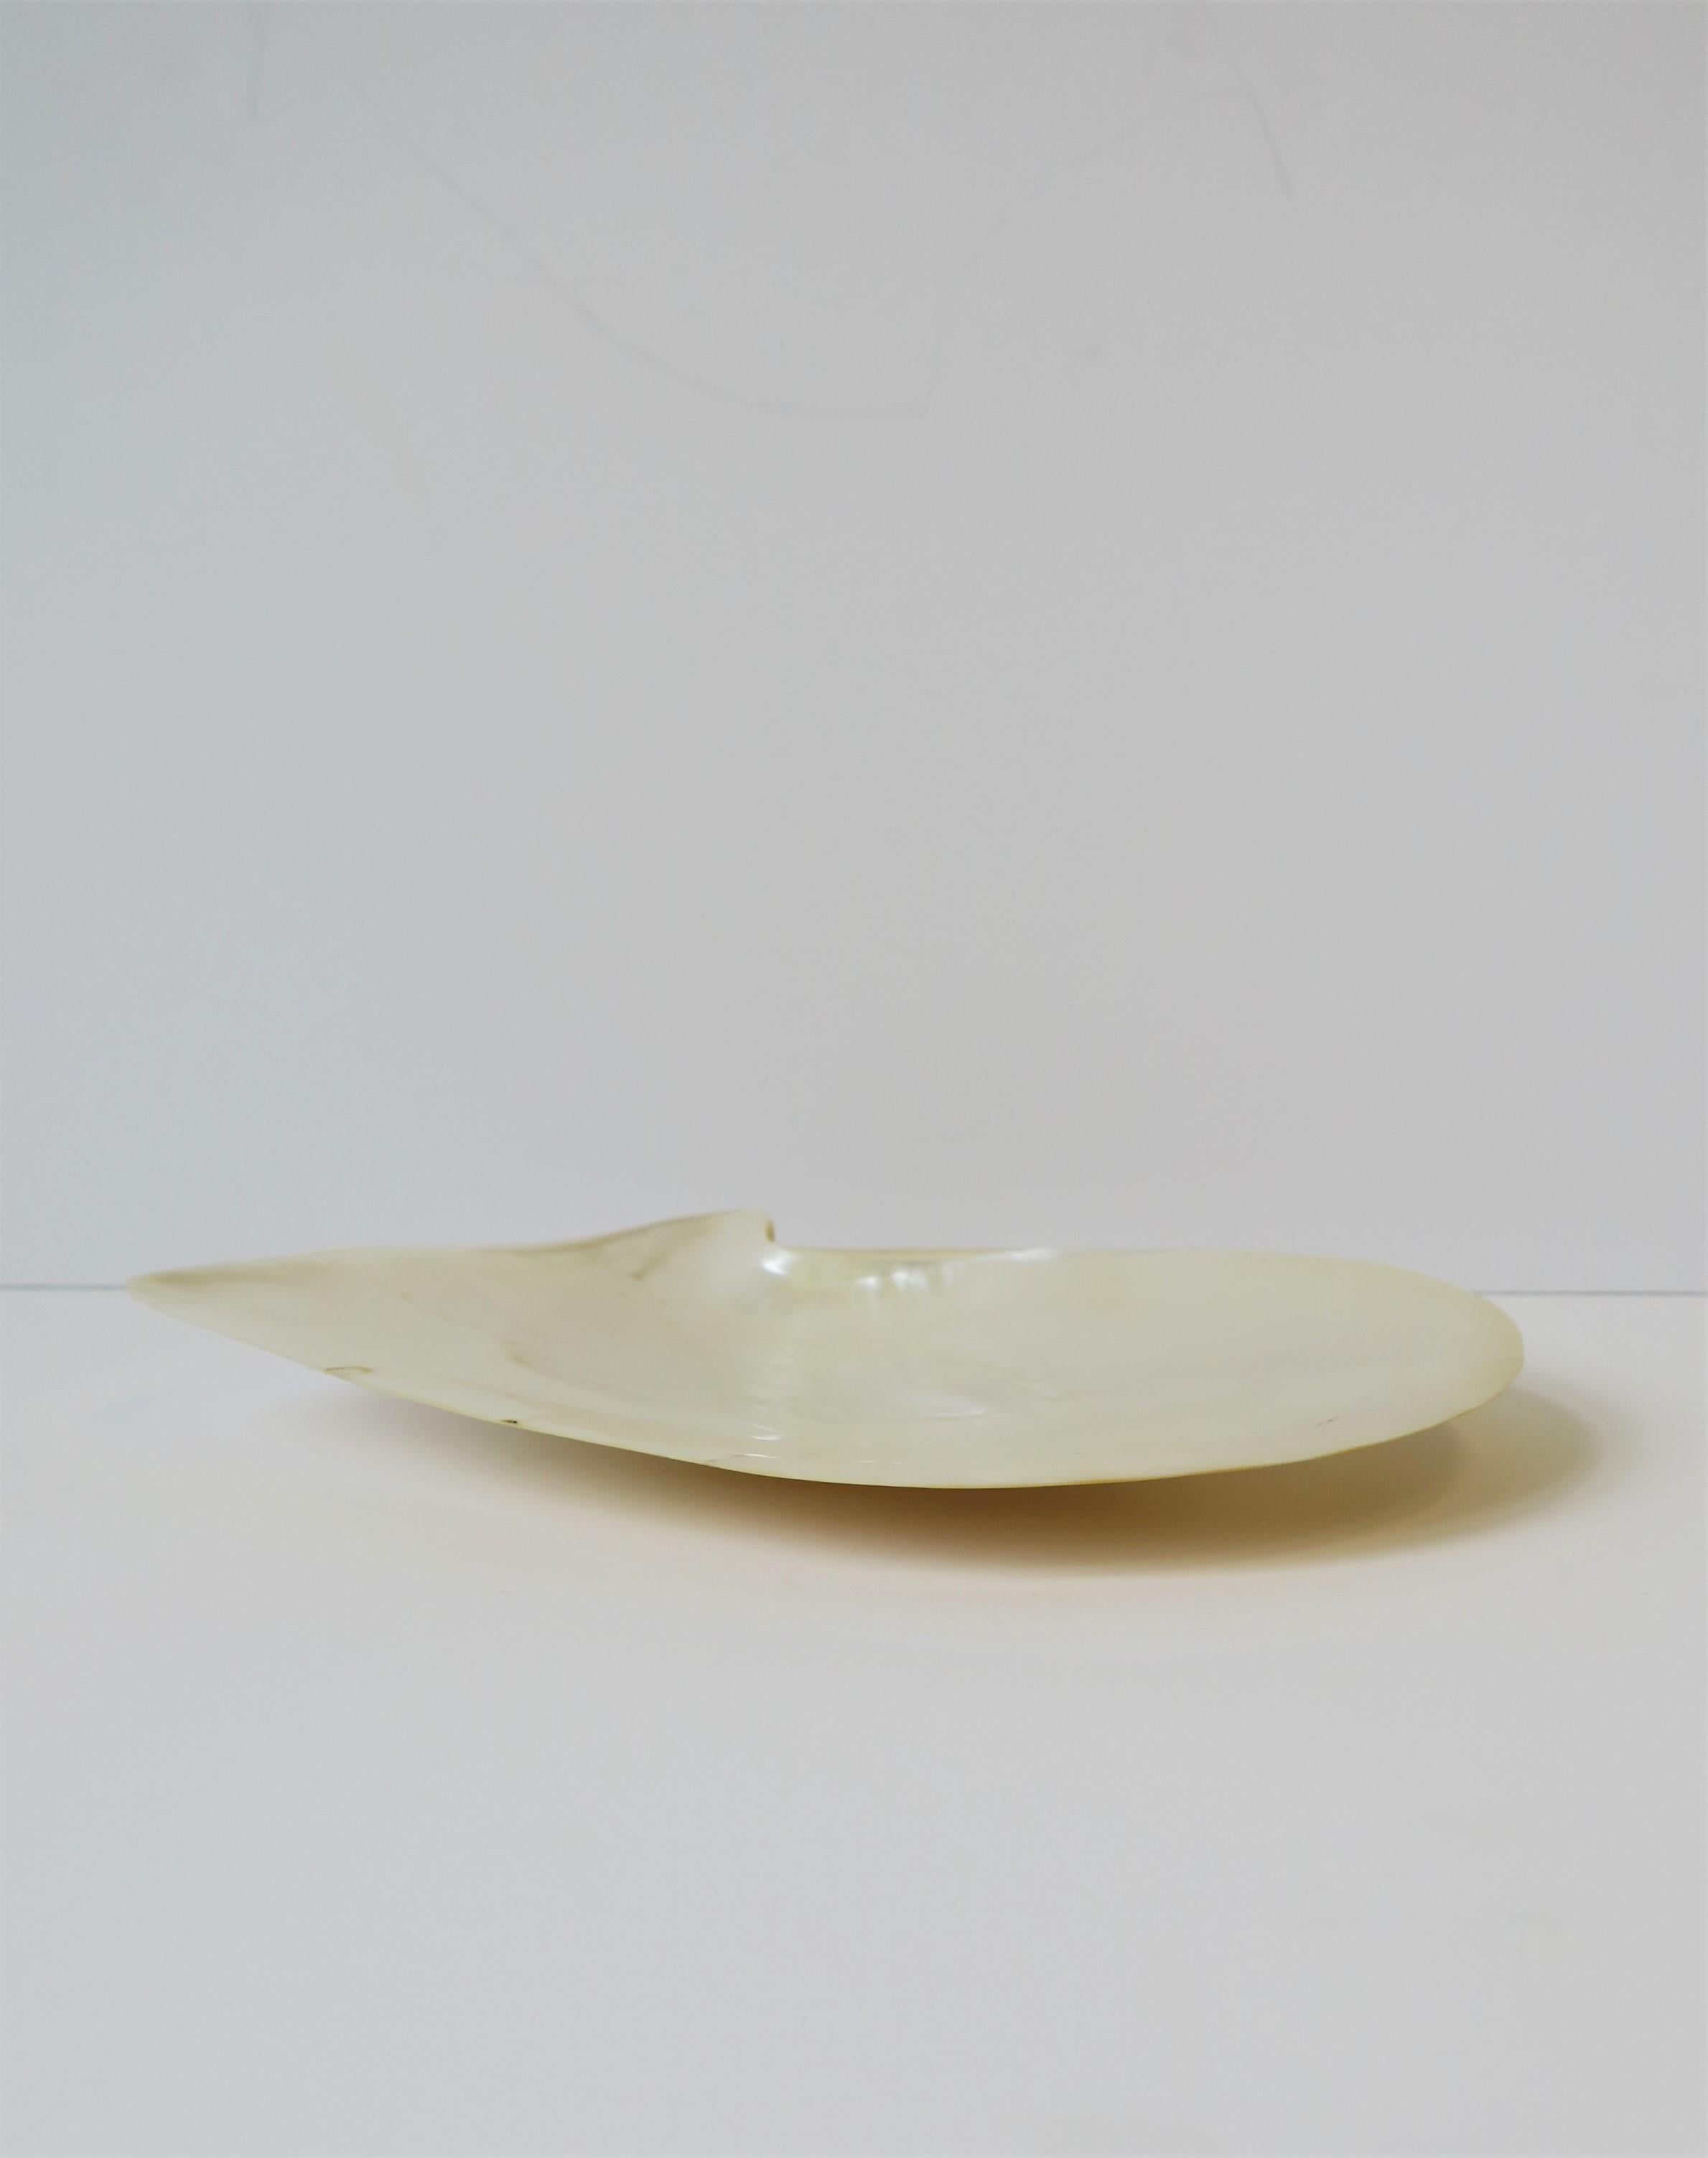 Polished Mother of Pearl Seashell Caviar Dish For Sale